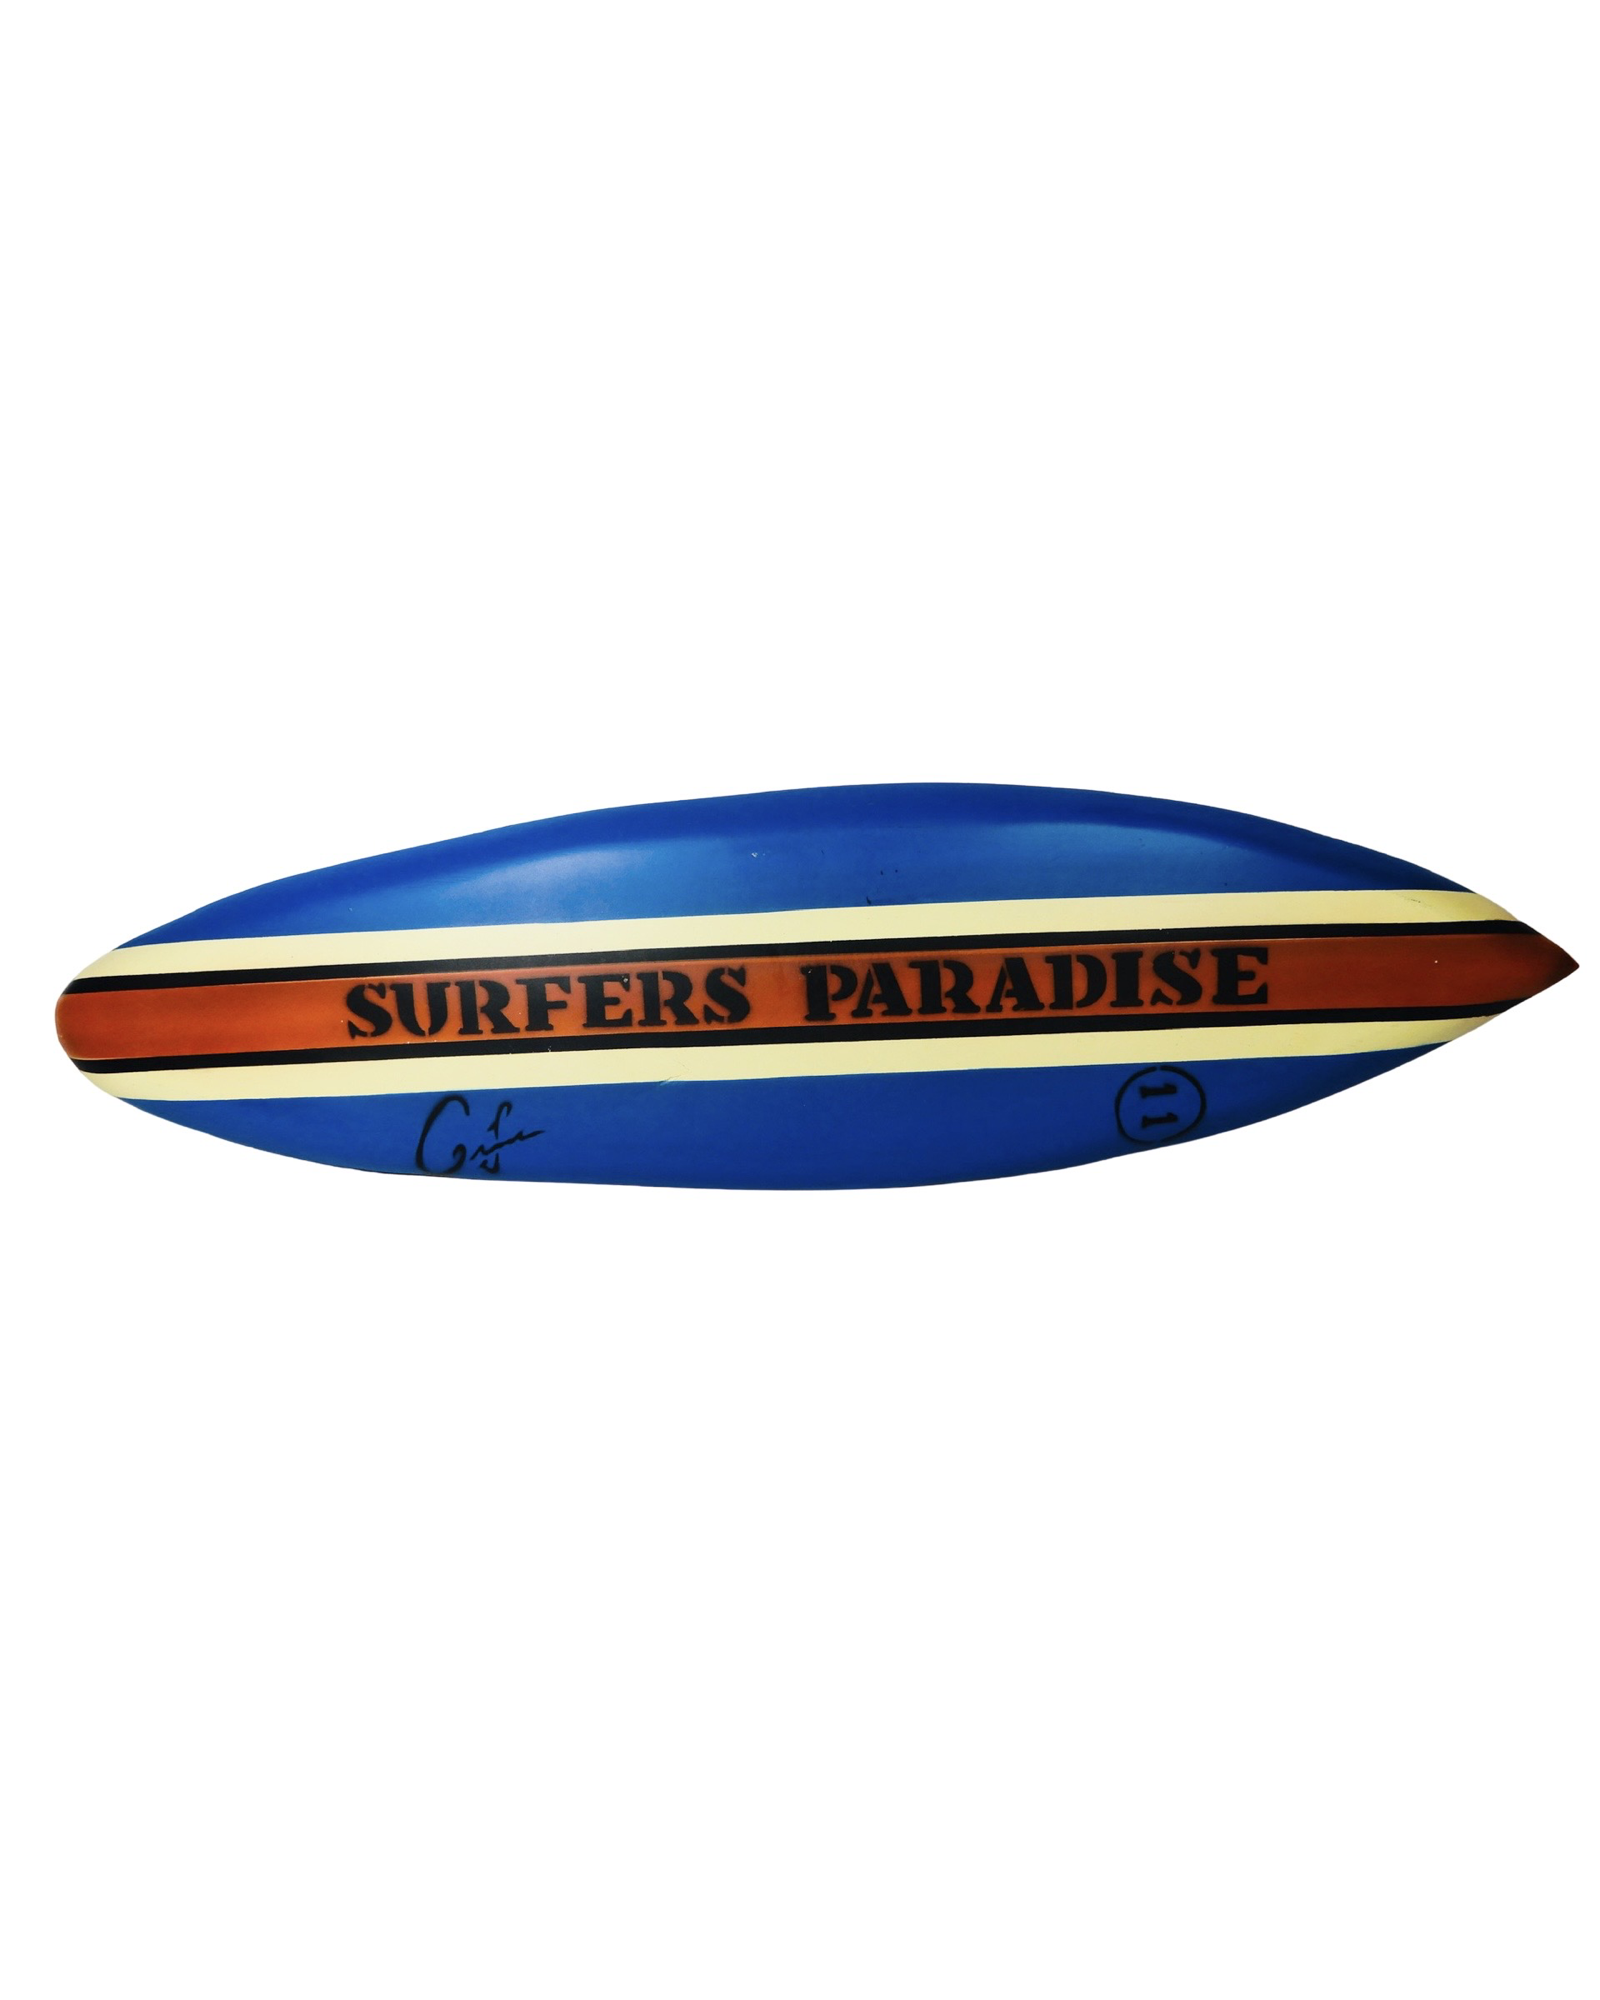 Solid mahogany surfboards with 'Surfers Paradise' writing. Available in grey, blue and natural. 